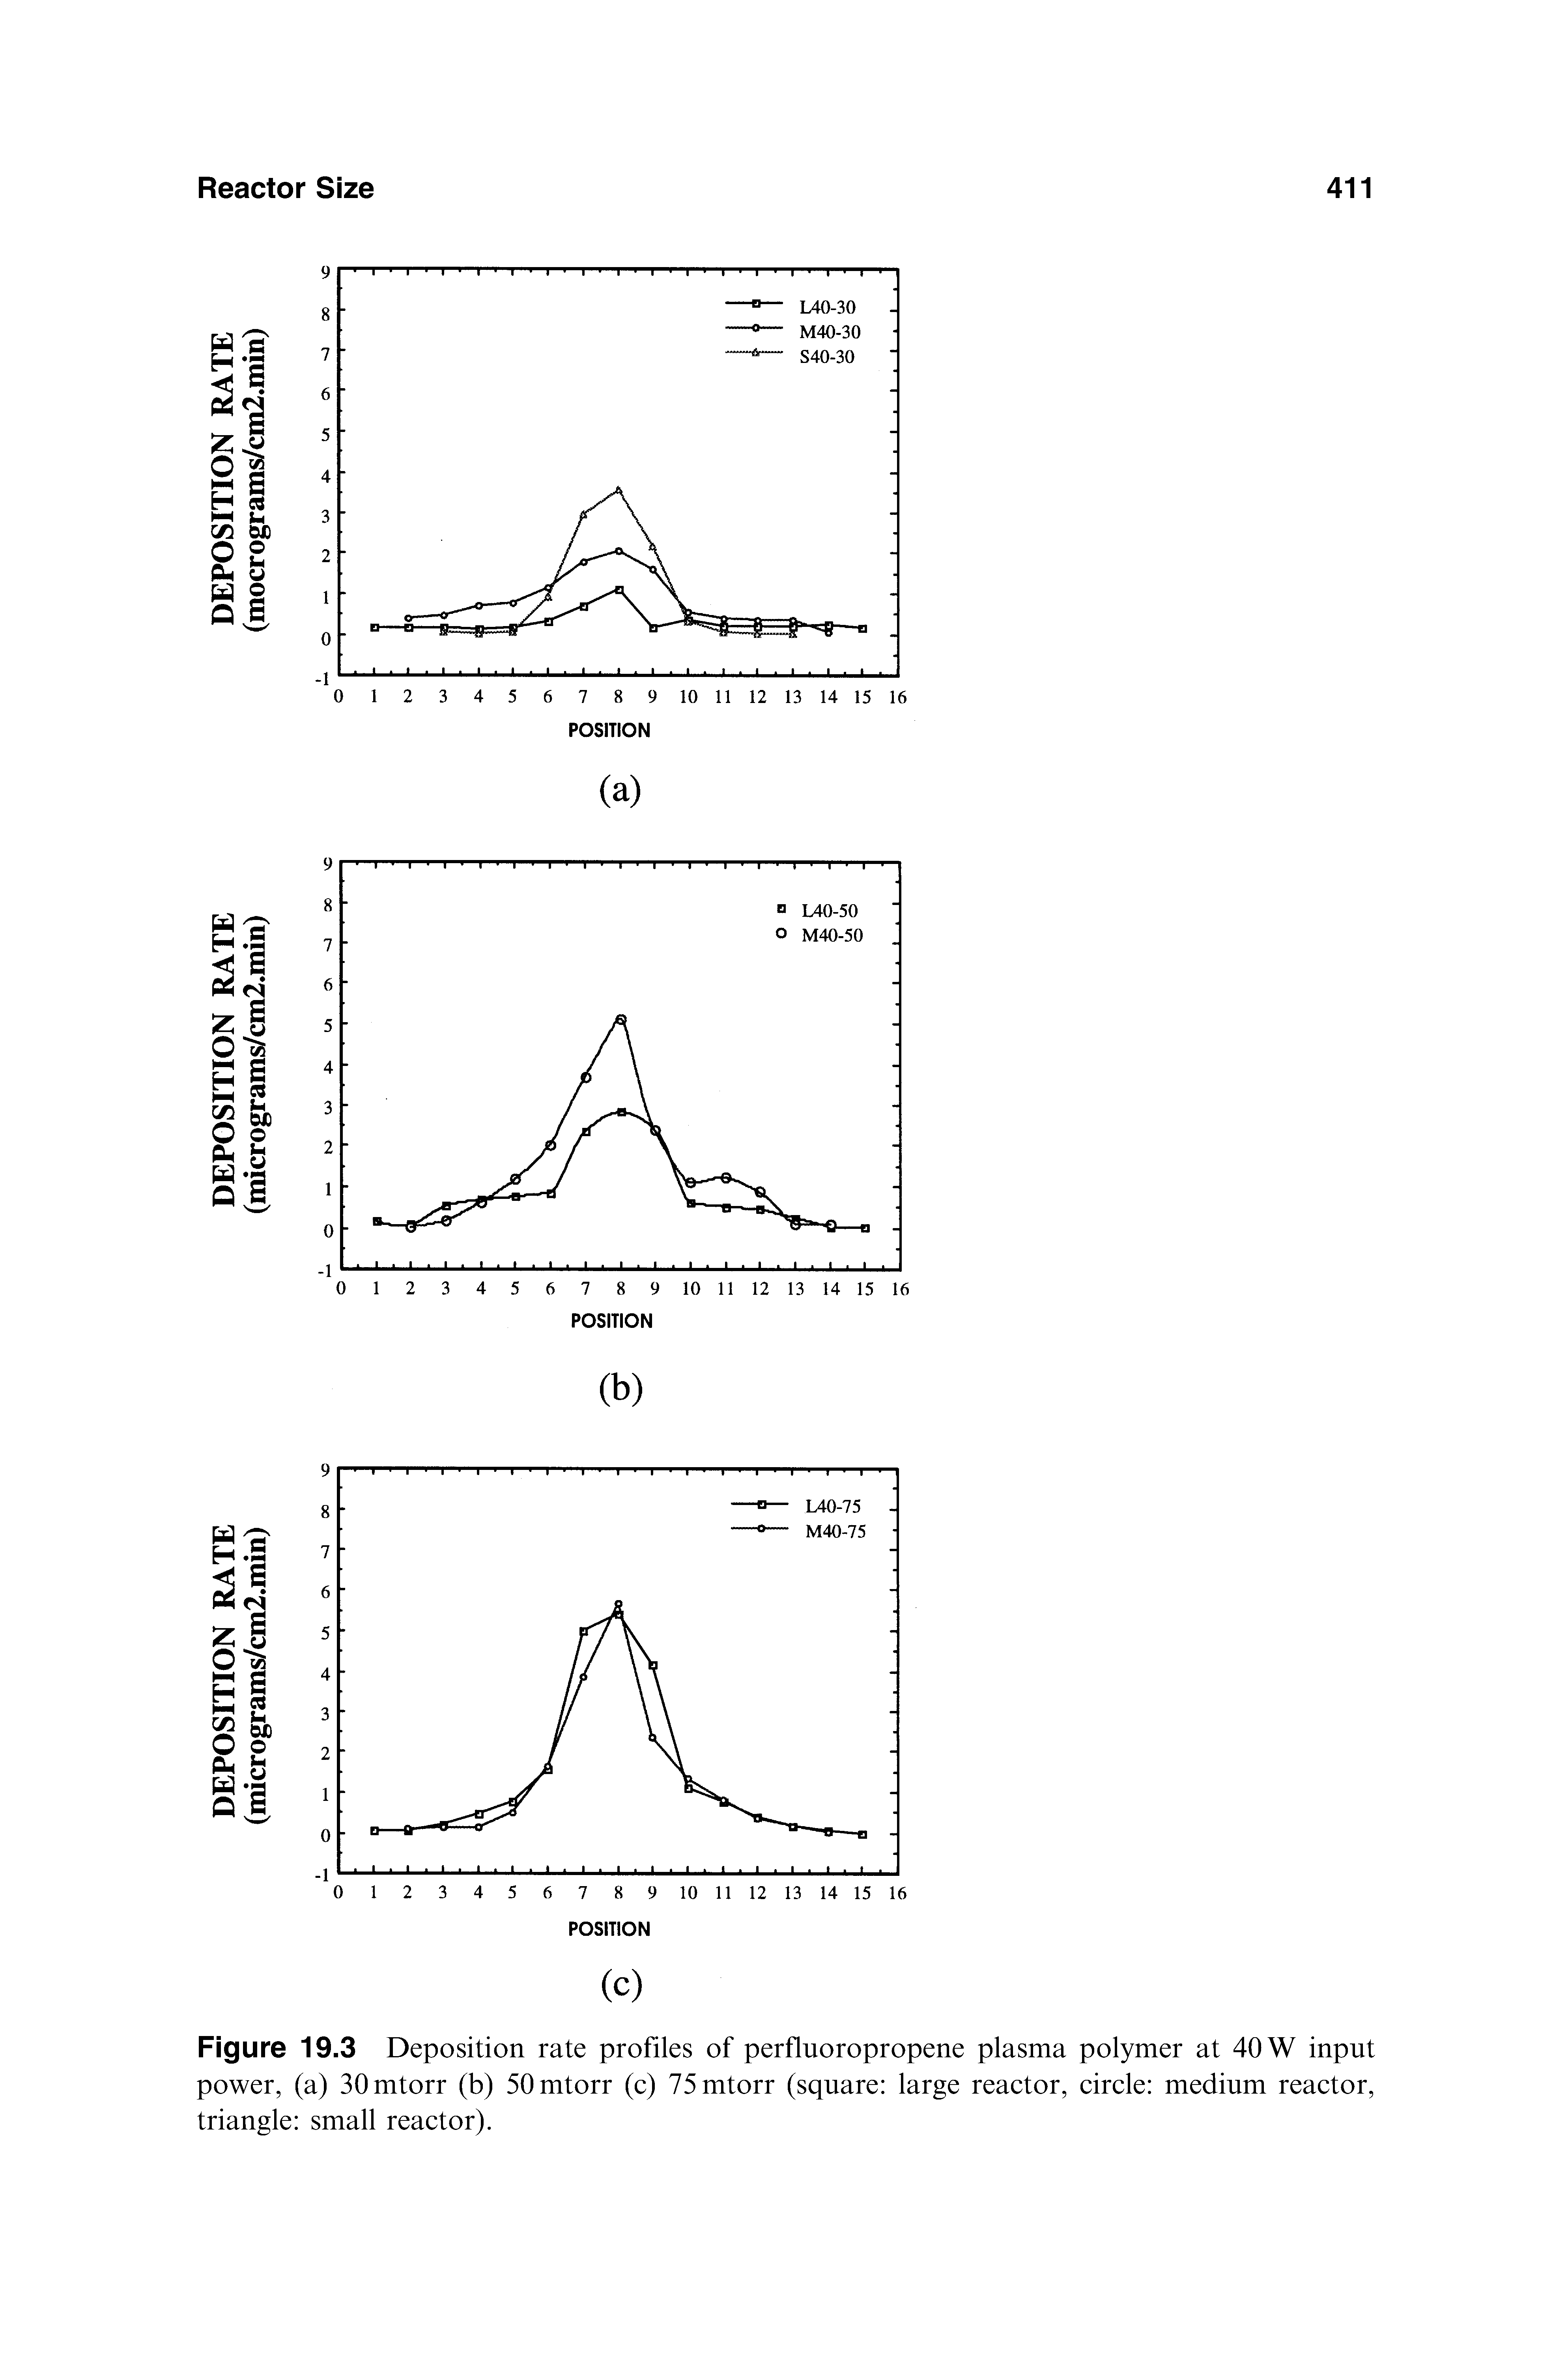 Figure 19.3 Deposition rate profiles of perfluoropropene plasma polymer at 40 W input power, (a) SOmtorr (b) SOmtorr (c) 75mtorr (square large reactor, circle medium reactor, triangle small reactor).